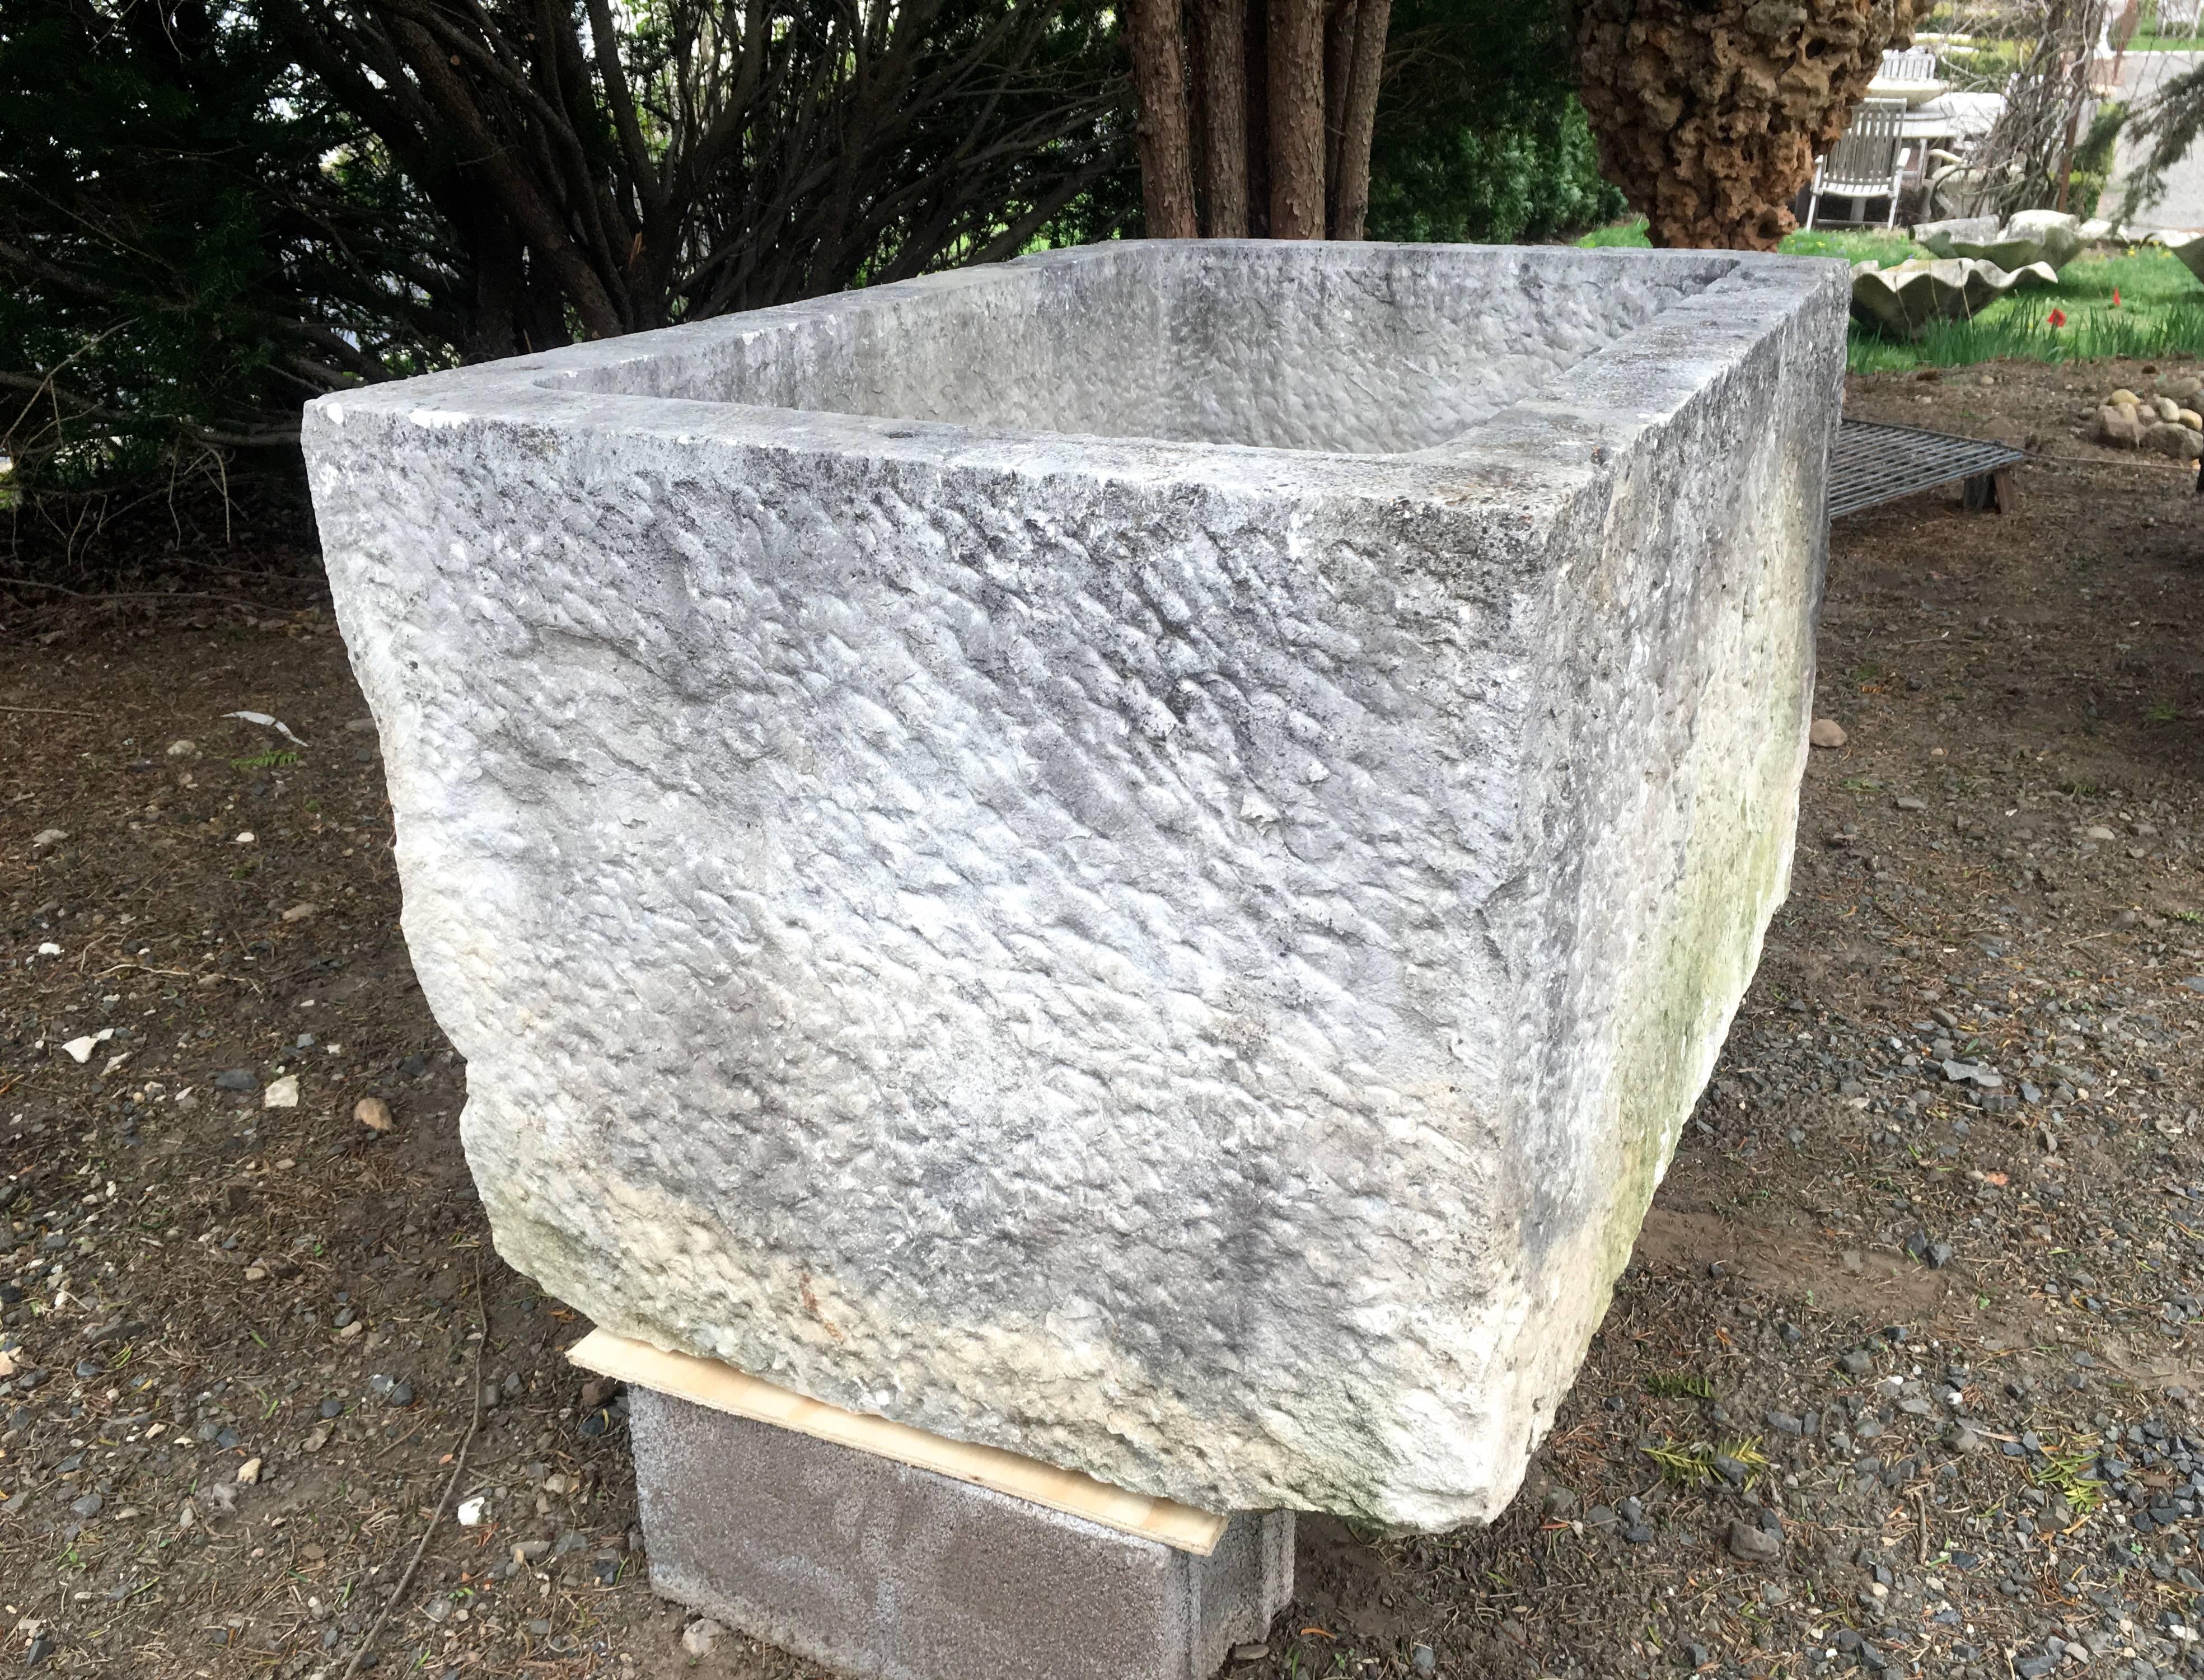 This lovely French carved limestone trough is the perfect size for a water feature or impressive planter in your garden. In immaculate condition, with only a single well-weathered chip to one corner, it would be stunning as a wall fountain with a